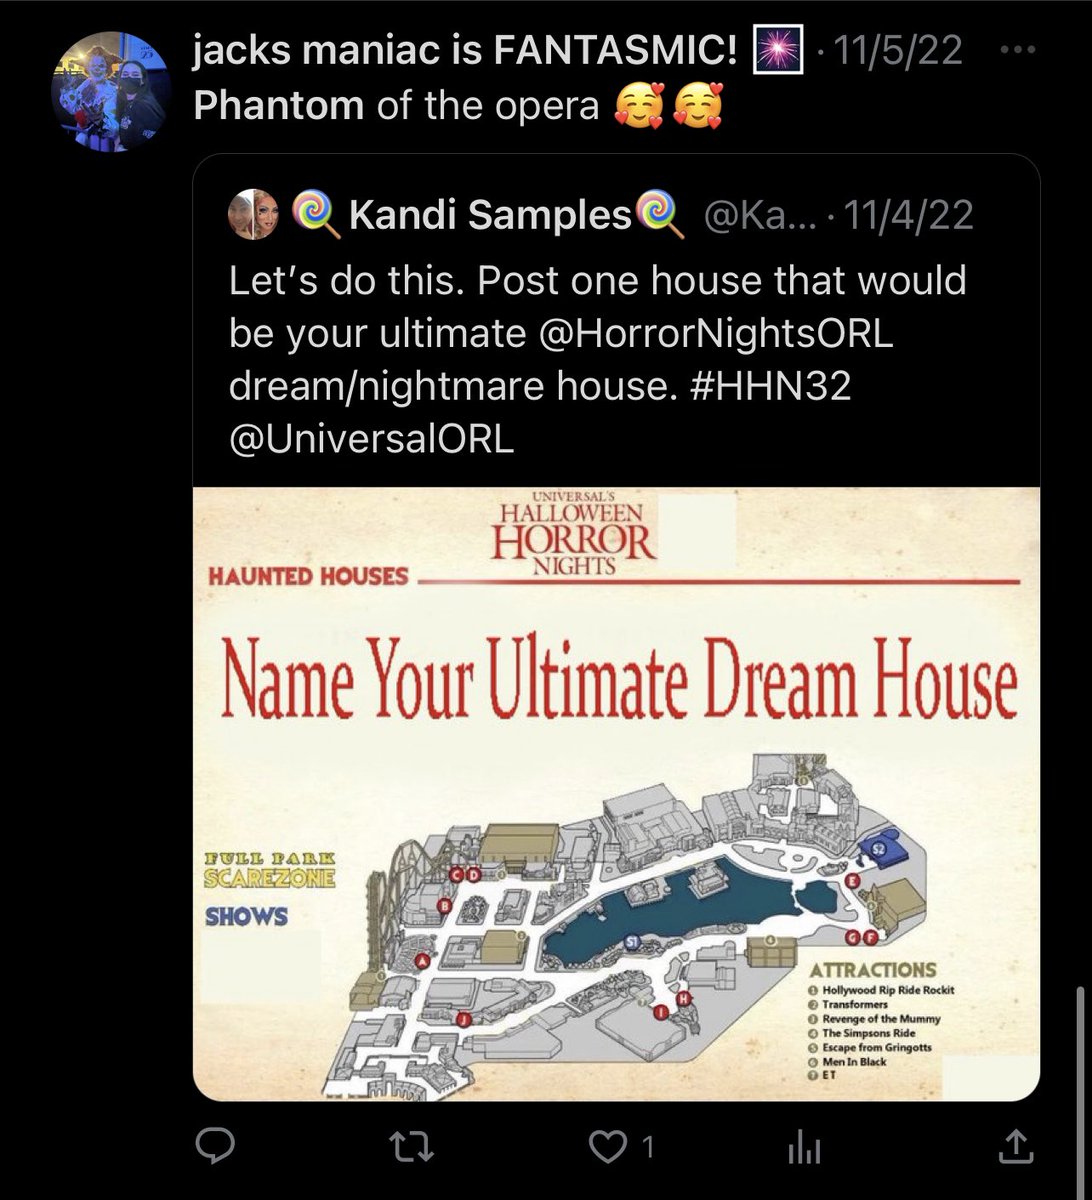 like ive been tweeting about a phantom house before hhn31 even ended.